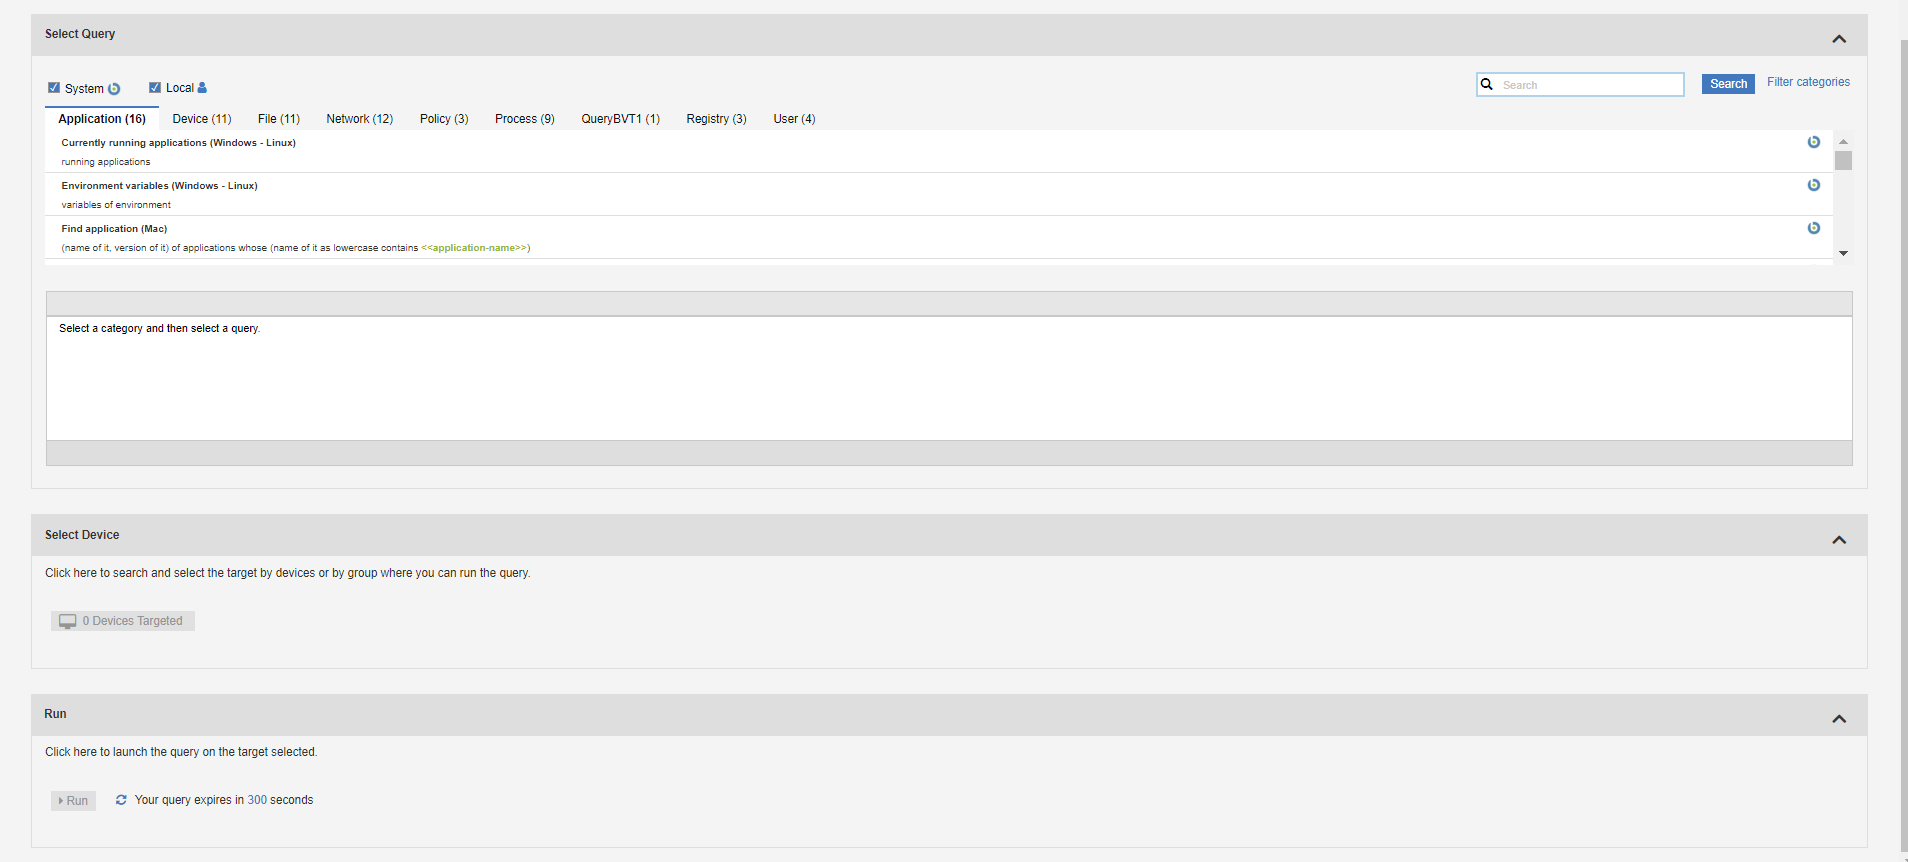 Image of the main Query editor page for an Operator.